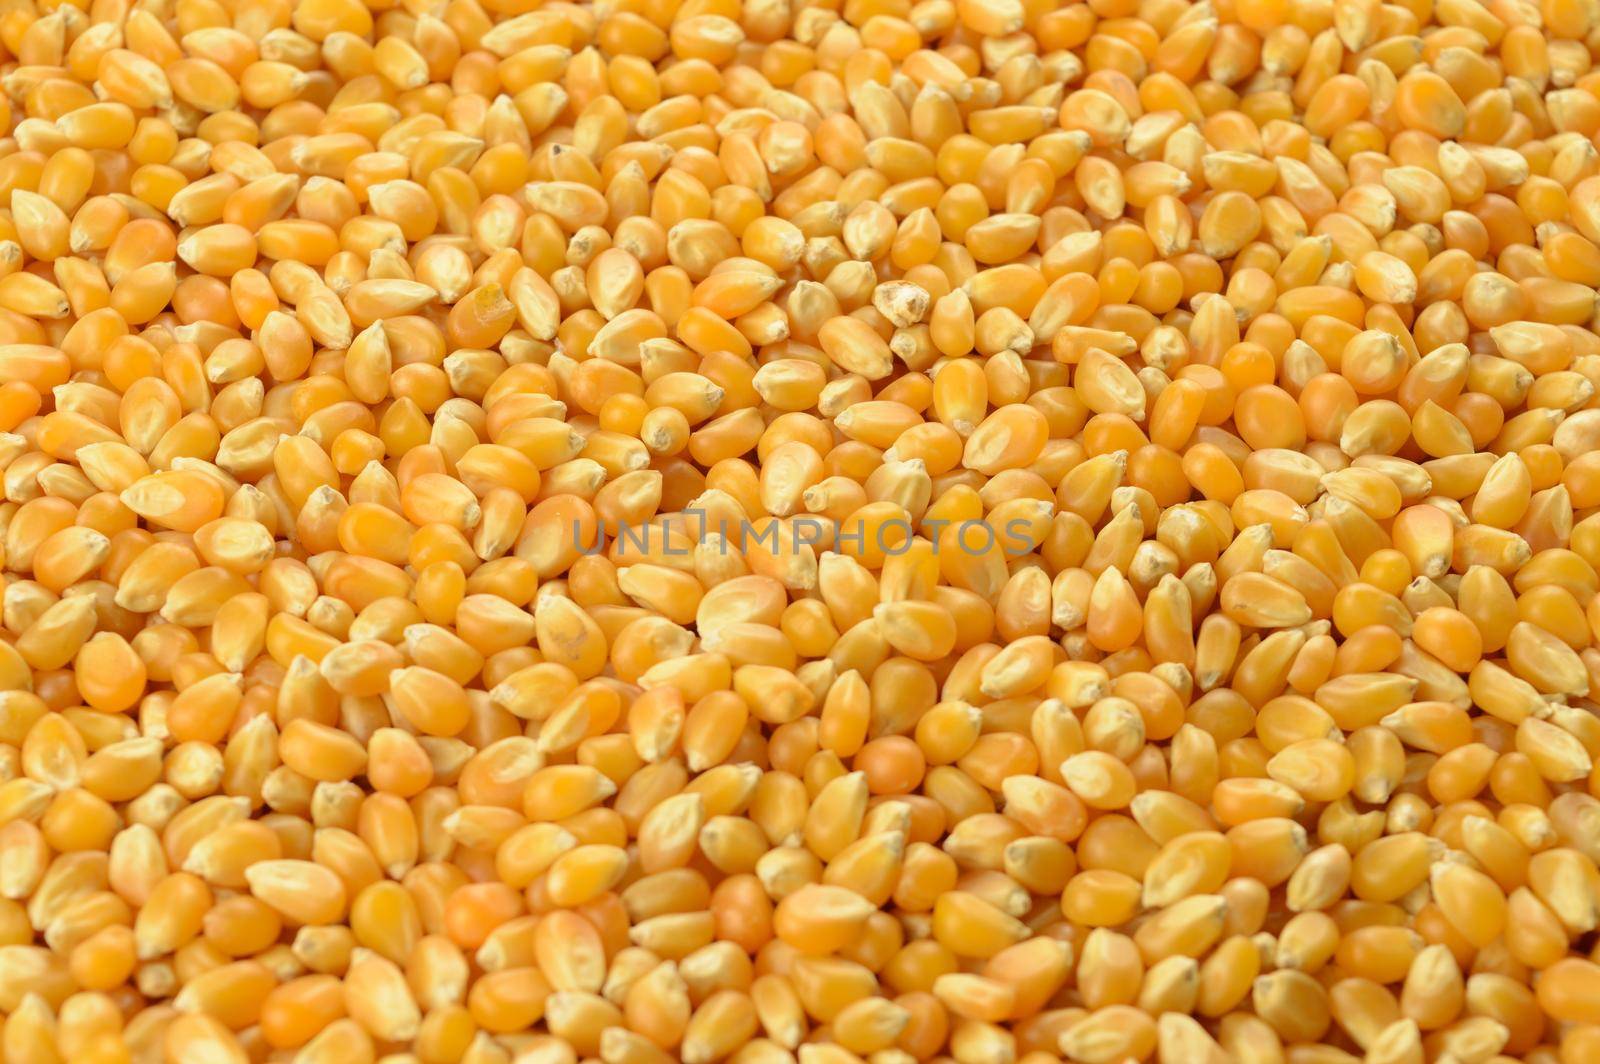 A closeup of whole kernel corn making a full frame background image.